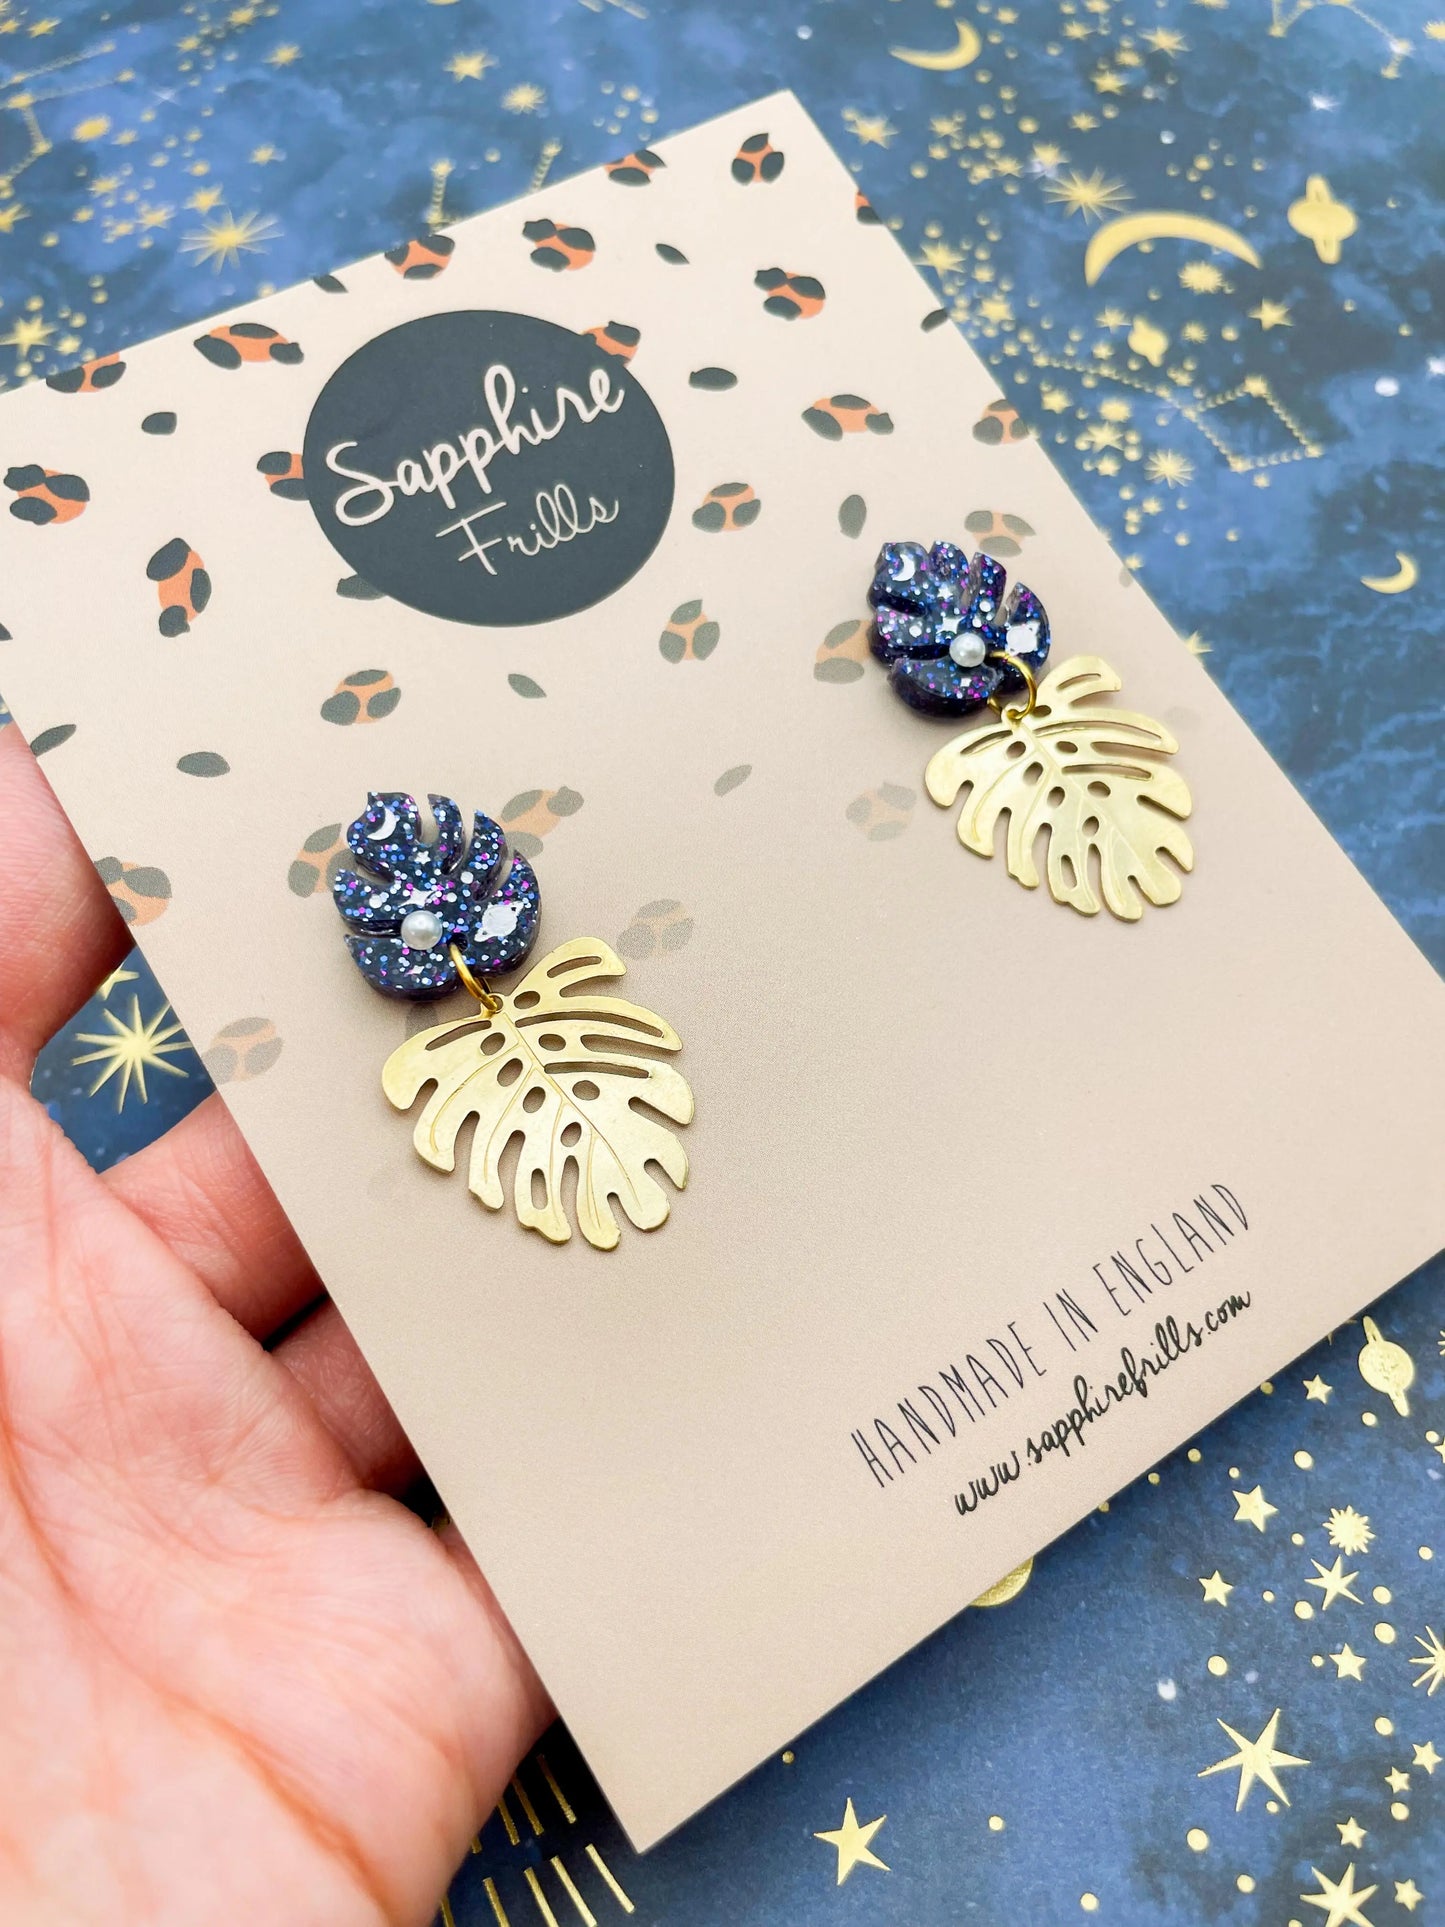 Purple, Blue and Gold Glitter Planet Acrylic Monstera Leaf Duo Dangle Earrings from Sapphire Frills